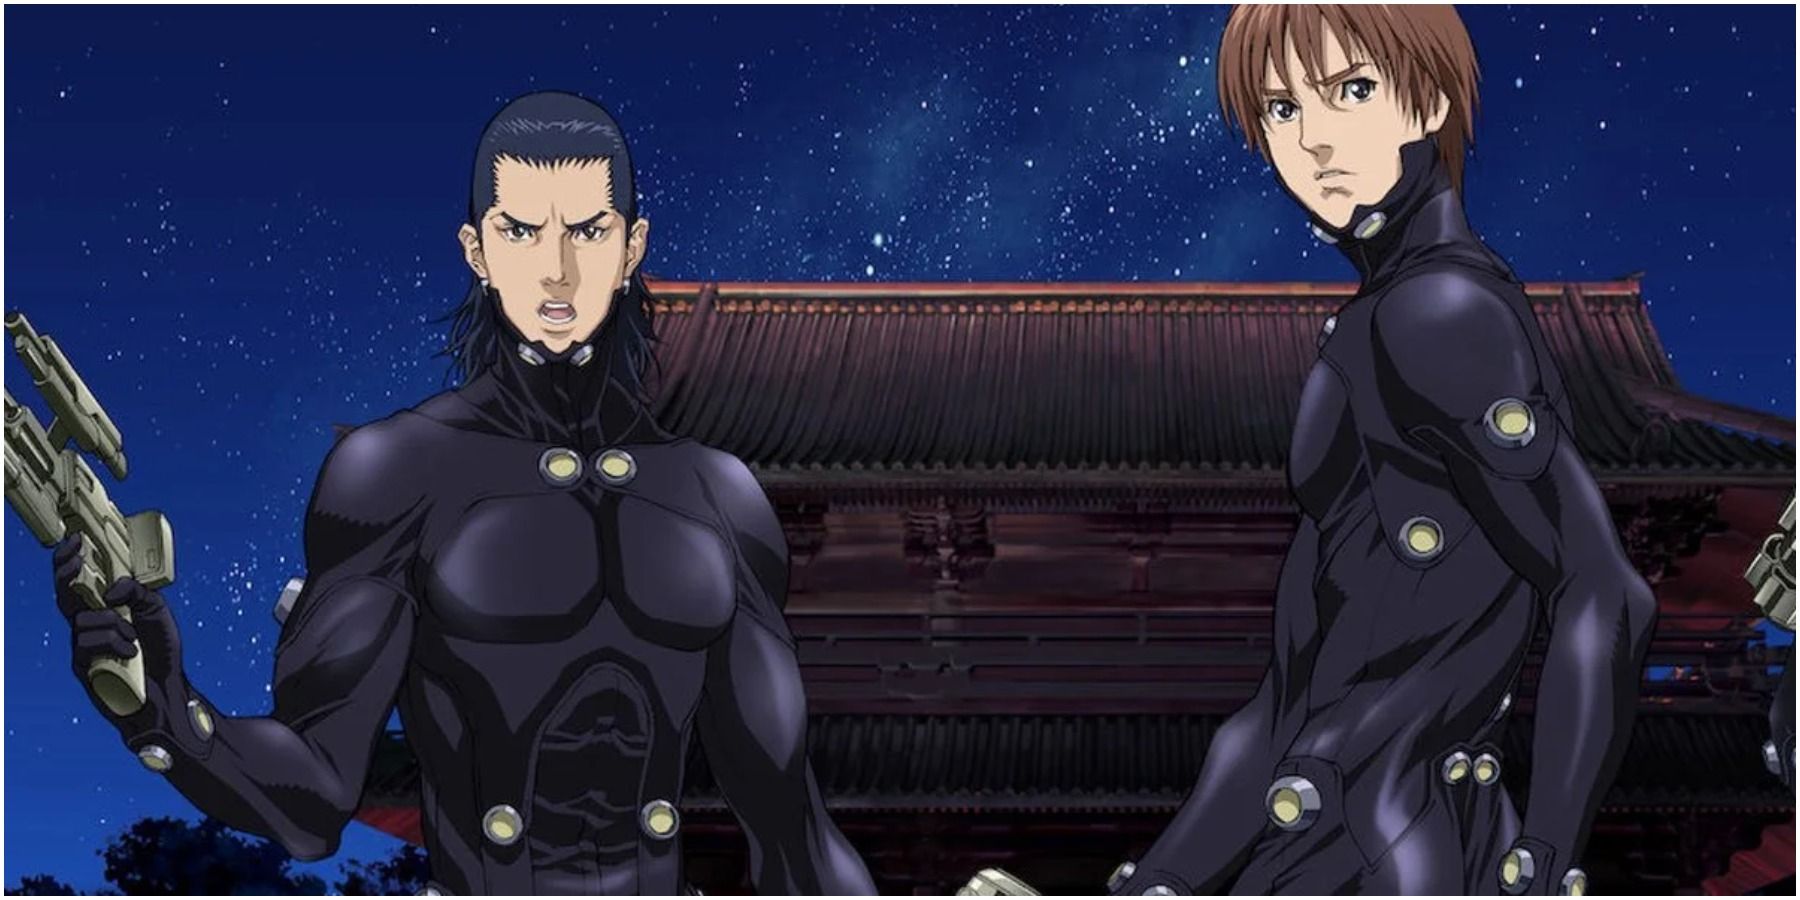 Gantz Characters In Their Suits